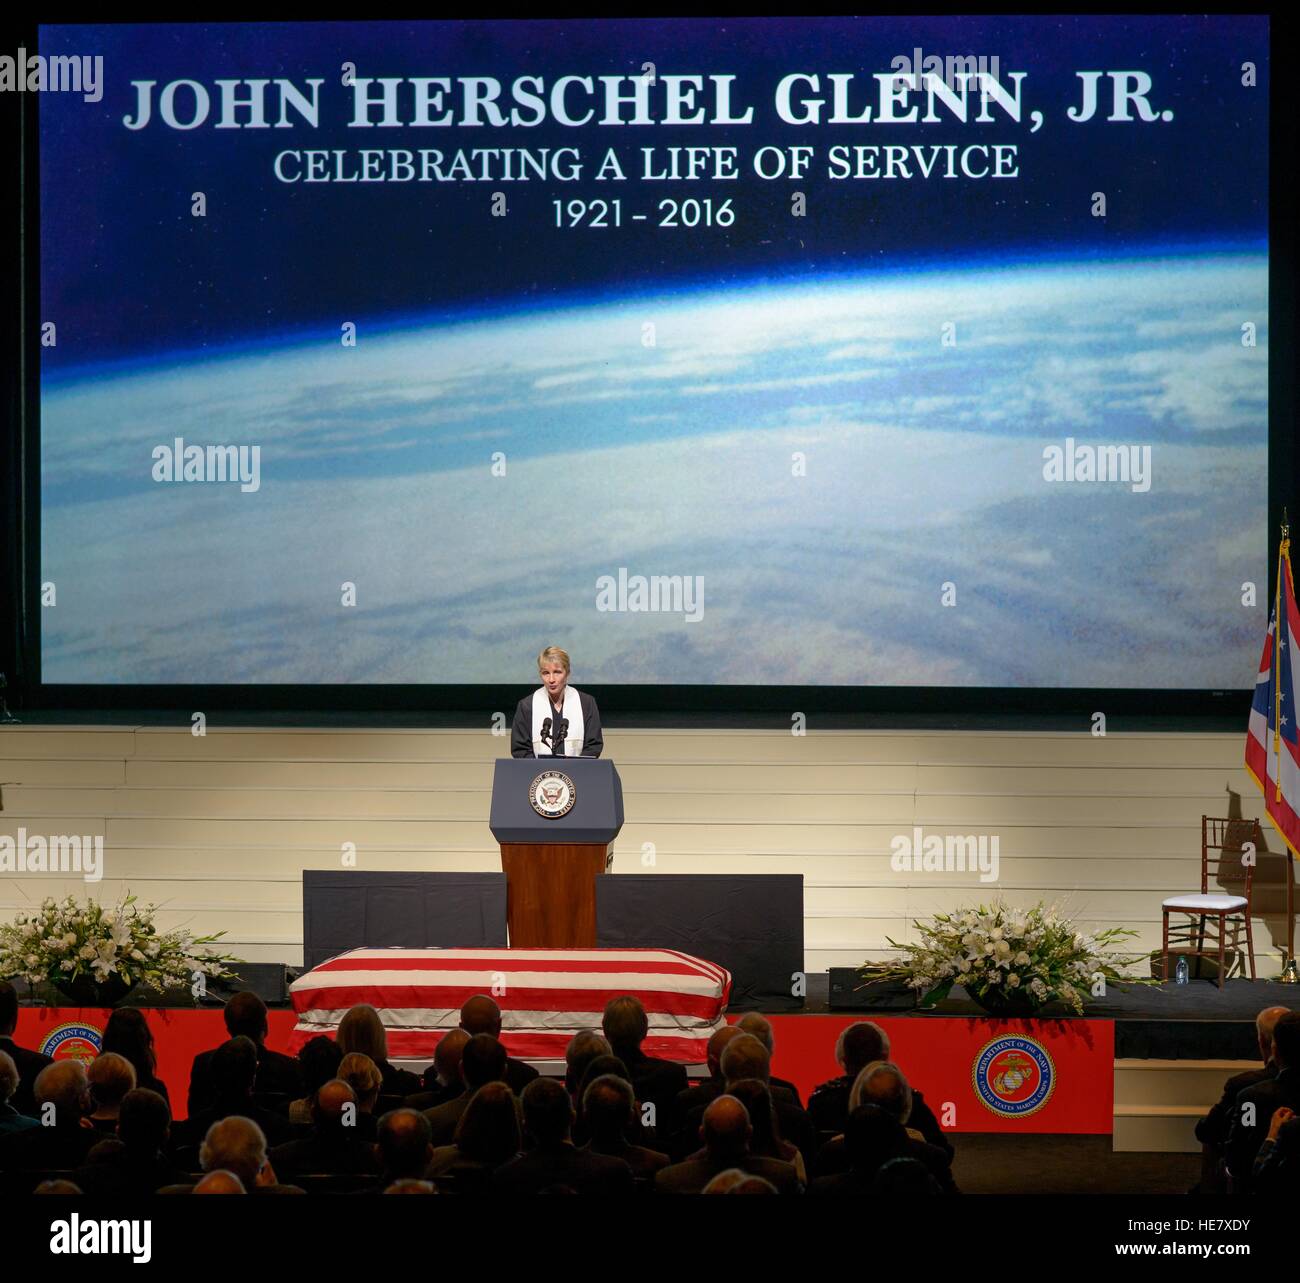 Pastor of Broad Street Presbyterian Church Amy Miracle welcomes family, friends and dignitaries during a service celebrating the life of former astronaut and U.S. Senator John Glenn during memorial service at Ohio State University December 17, 2016 in Columbus, Ohio. The former Marine pilot, Senator and first man to orbit the earth died last week at the age of 95. Stock Photo